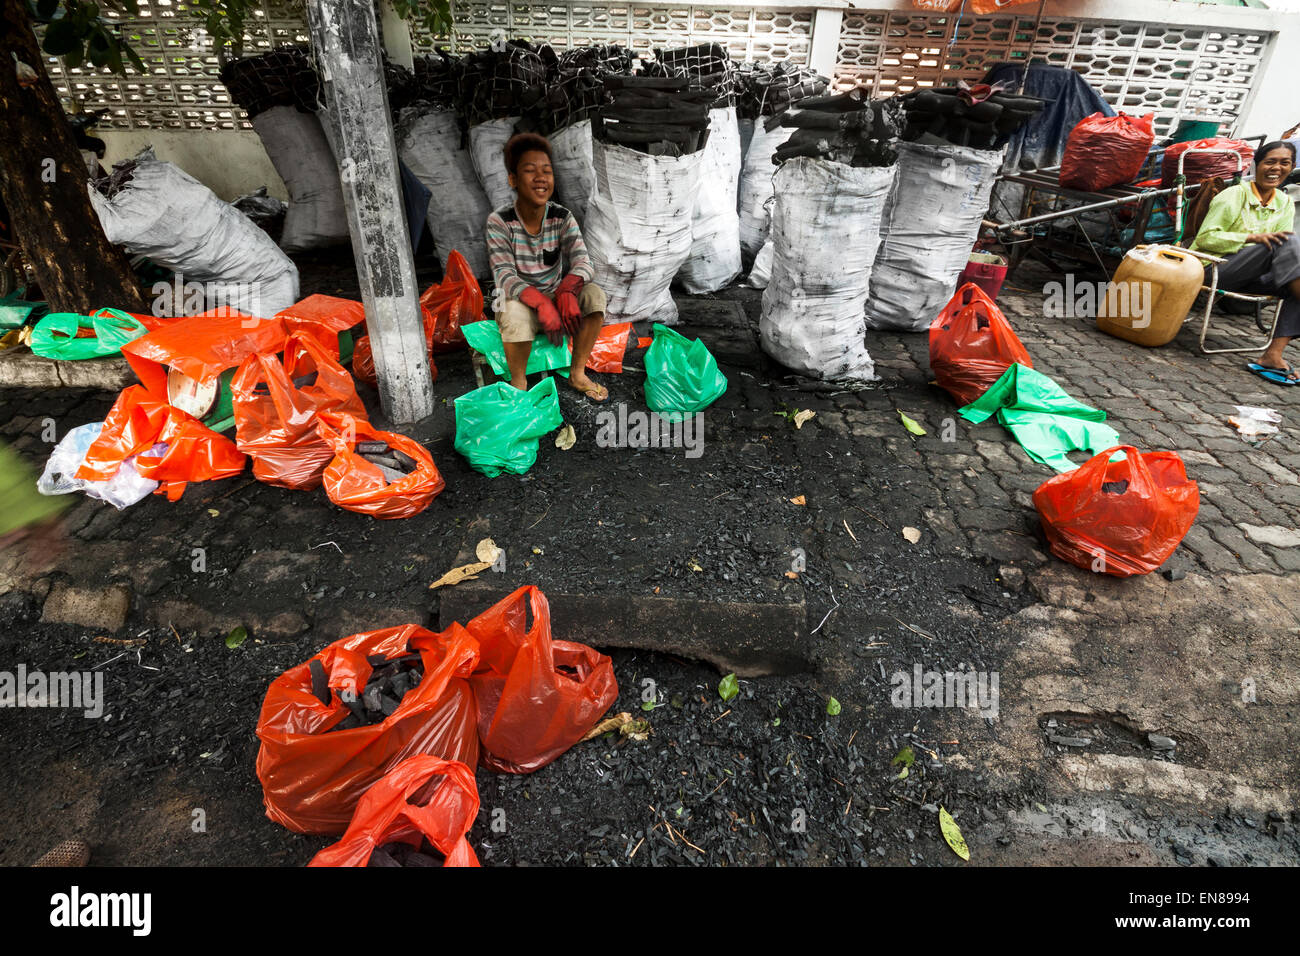 Cambodians sell charcoals on the street in Phnom Pen, Cambodia, Asia. Stock Photo